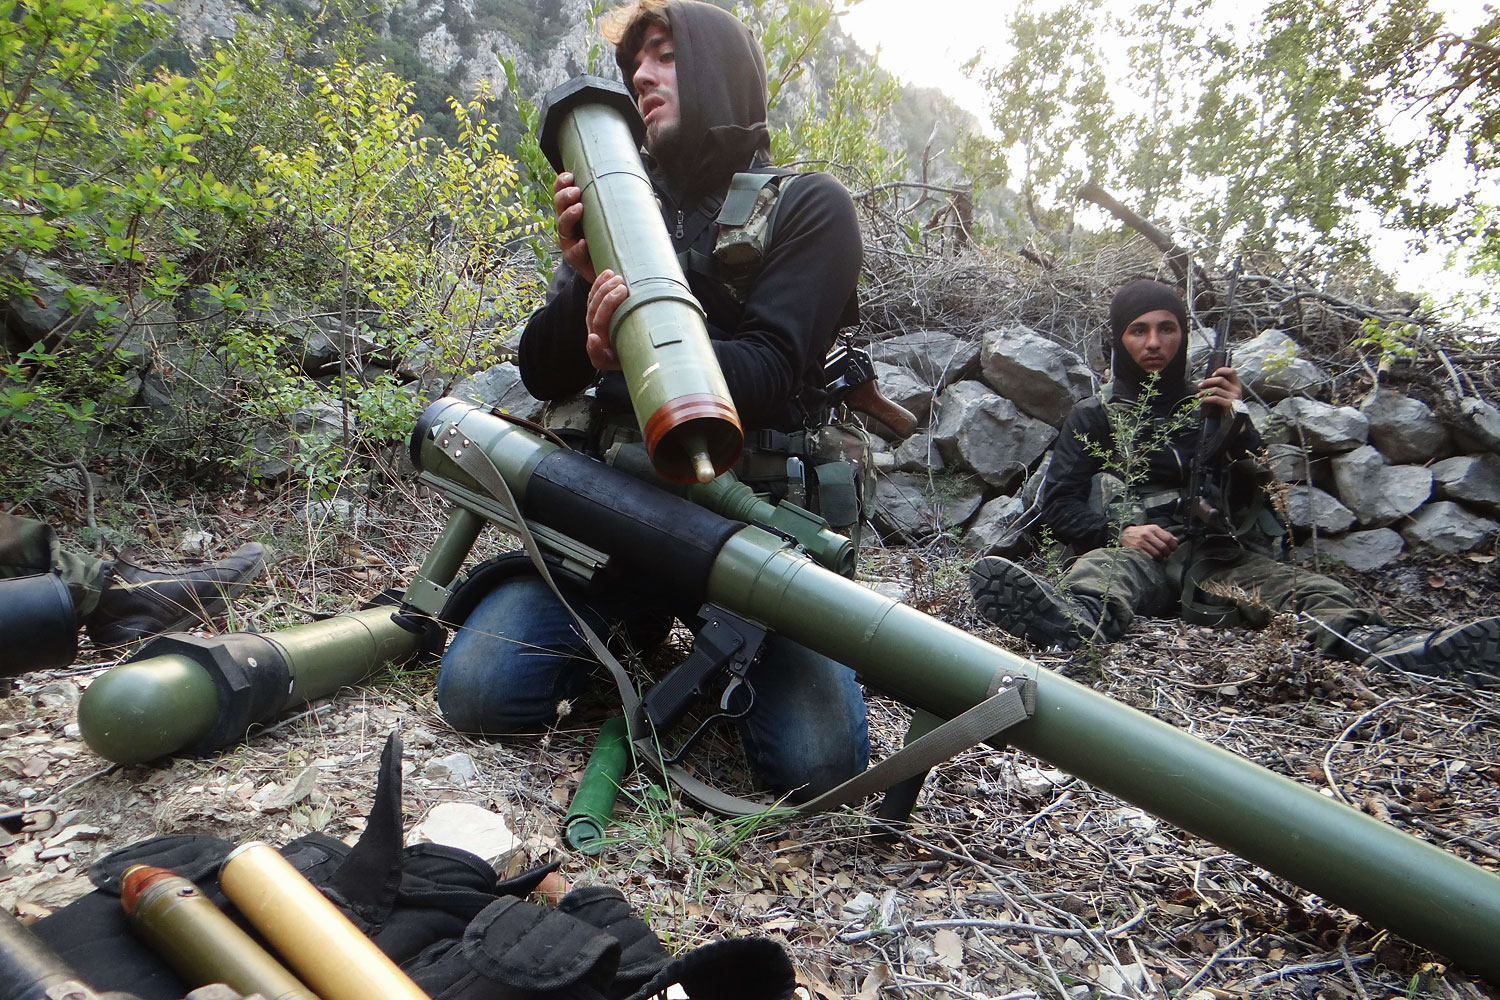 A rebel fighter checks a launcher near the village of Kessab and the border crossing with Turkey, in the northwestern province of Latakia, on March 23, 2014.  Rebels seized Kessab a day later. (Amr Radwan al-Homsi—AFP/Getty Images)